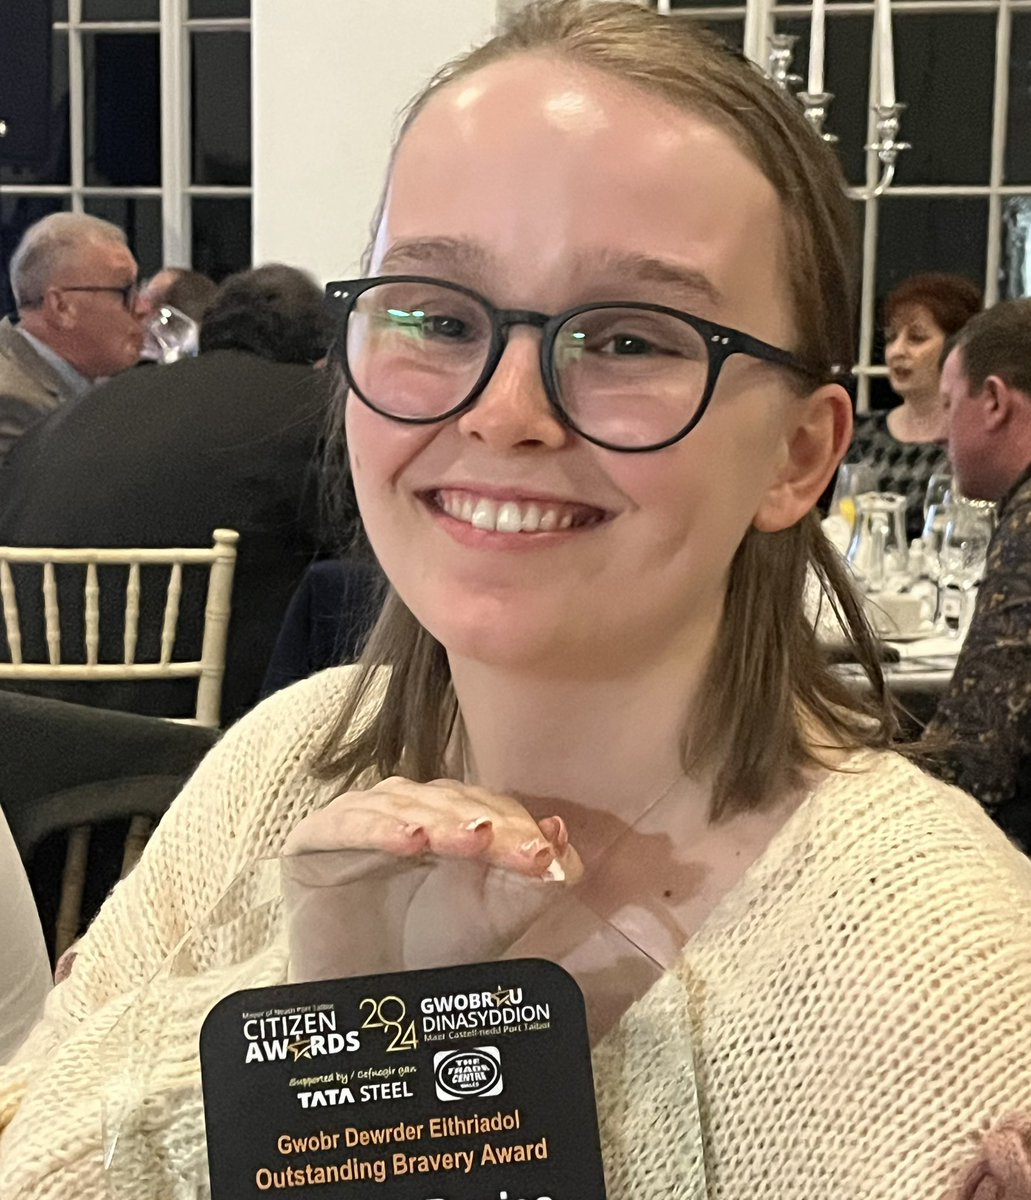 #LongCovid is a chronic illness. It’s relentless and unforgiving. One day - all #LongCovidkids will realise how hard it’s been and how brave they are. Last night though - @NPTCouncil honoured this young lady for just that - overcoming adversity and not letting it define her